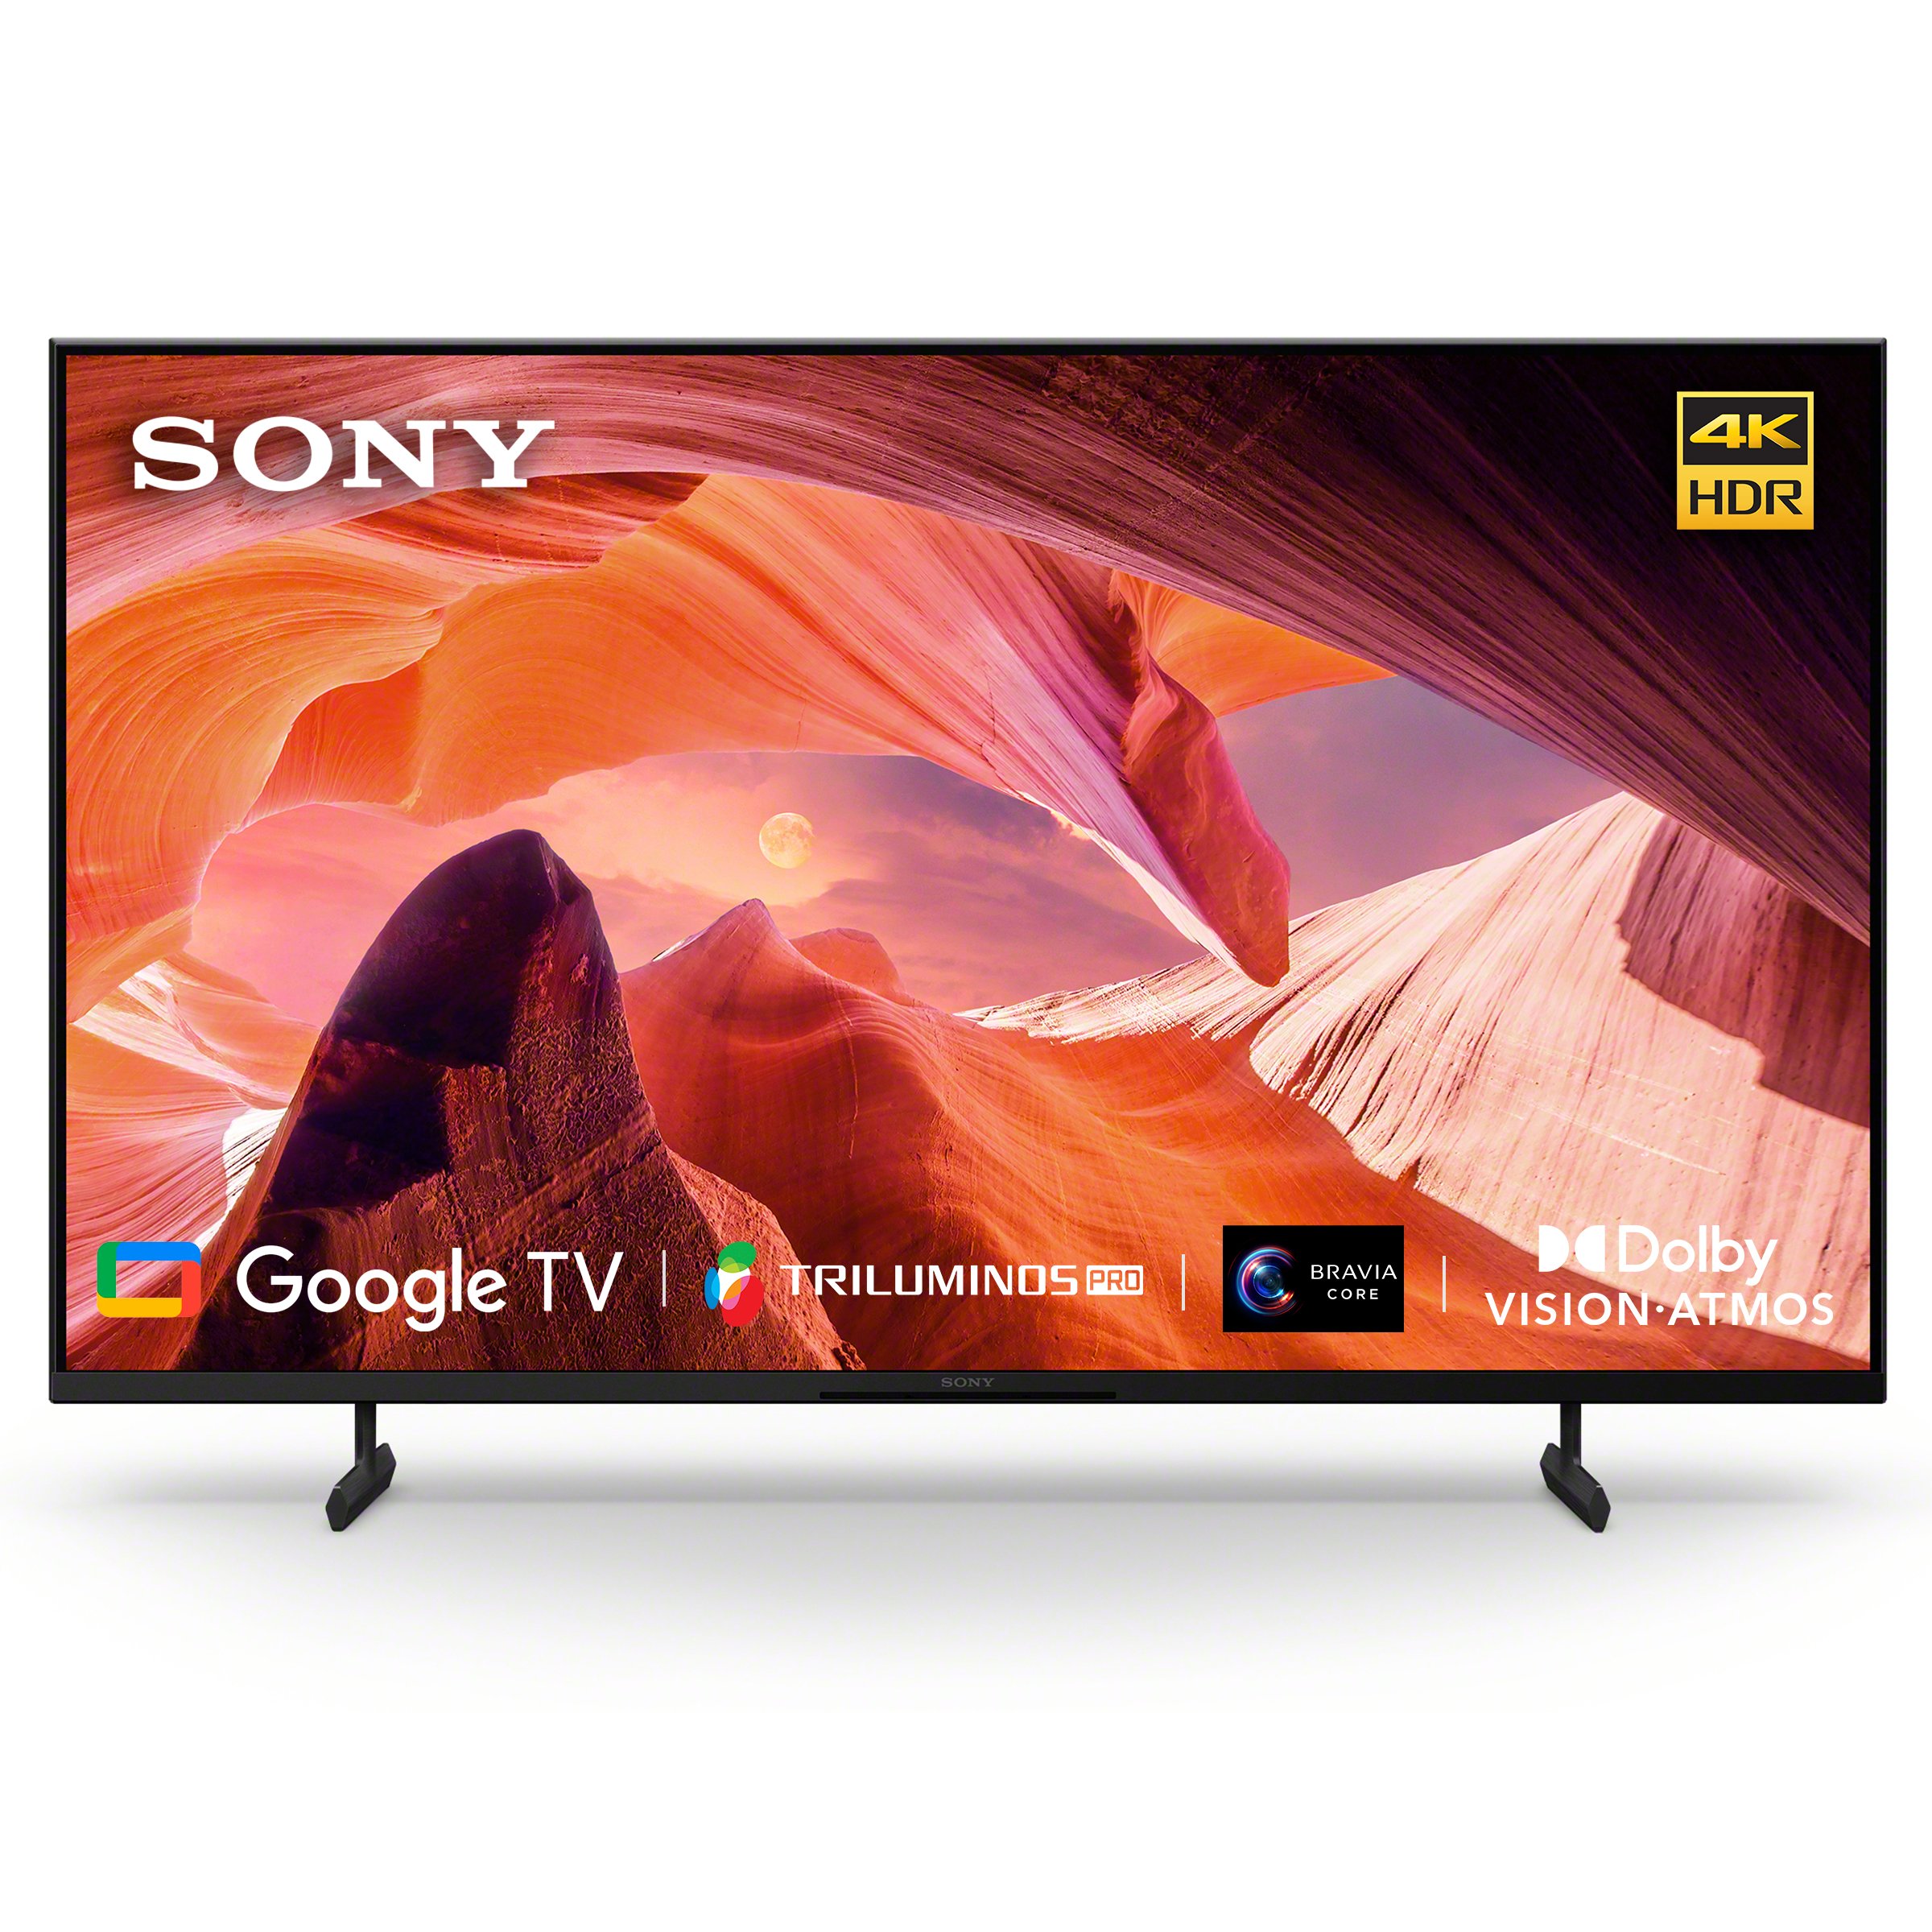 LED TV Buy, Shop, Compare sony UHD and Smart LED TV at EMI Online